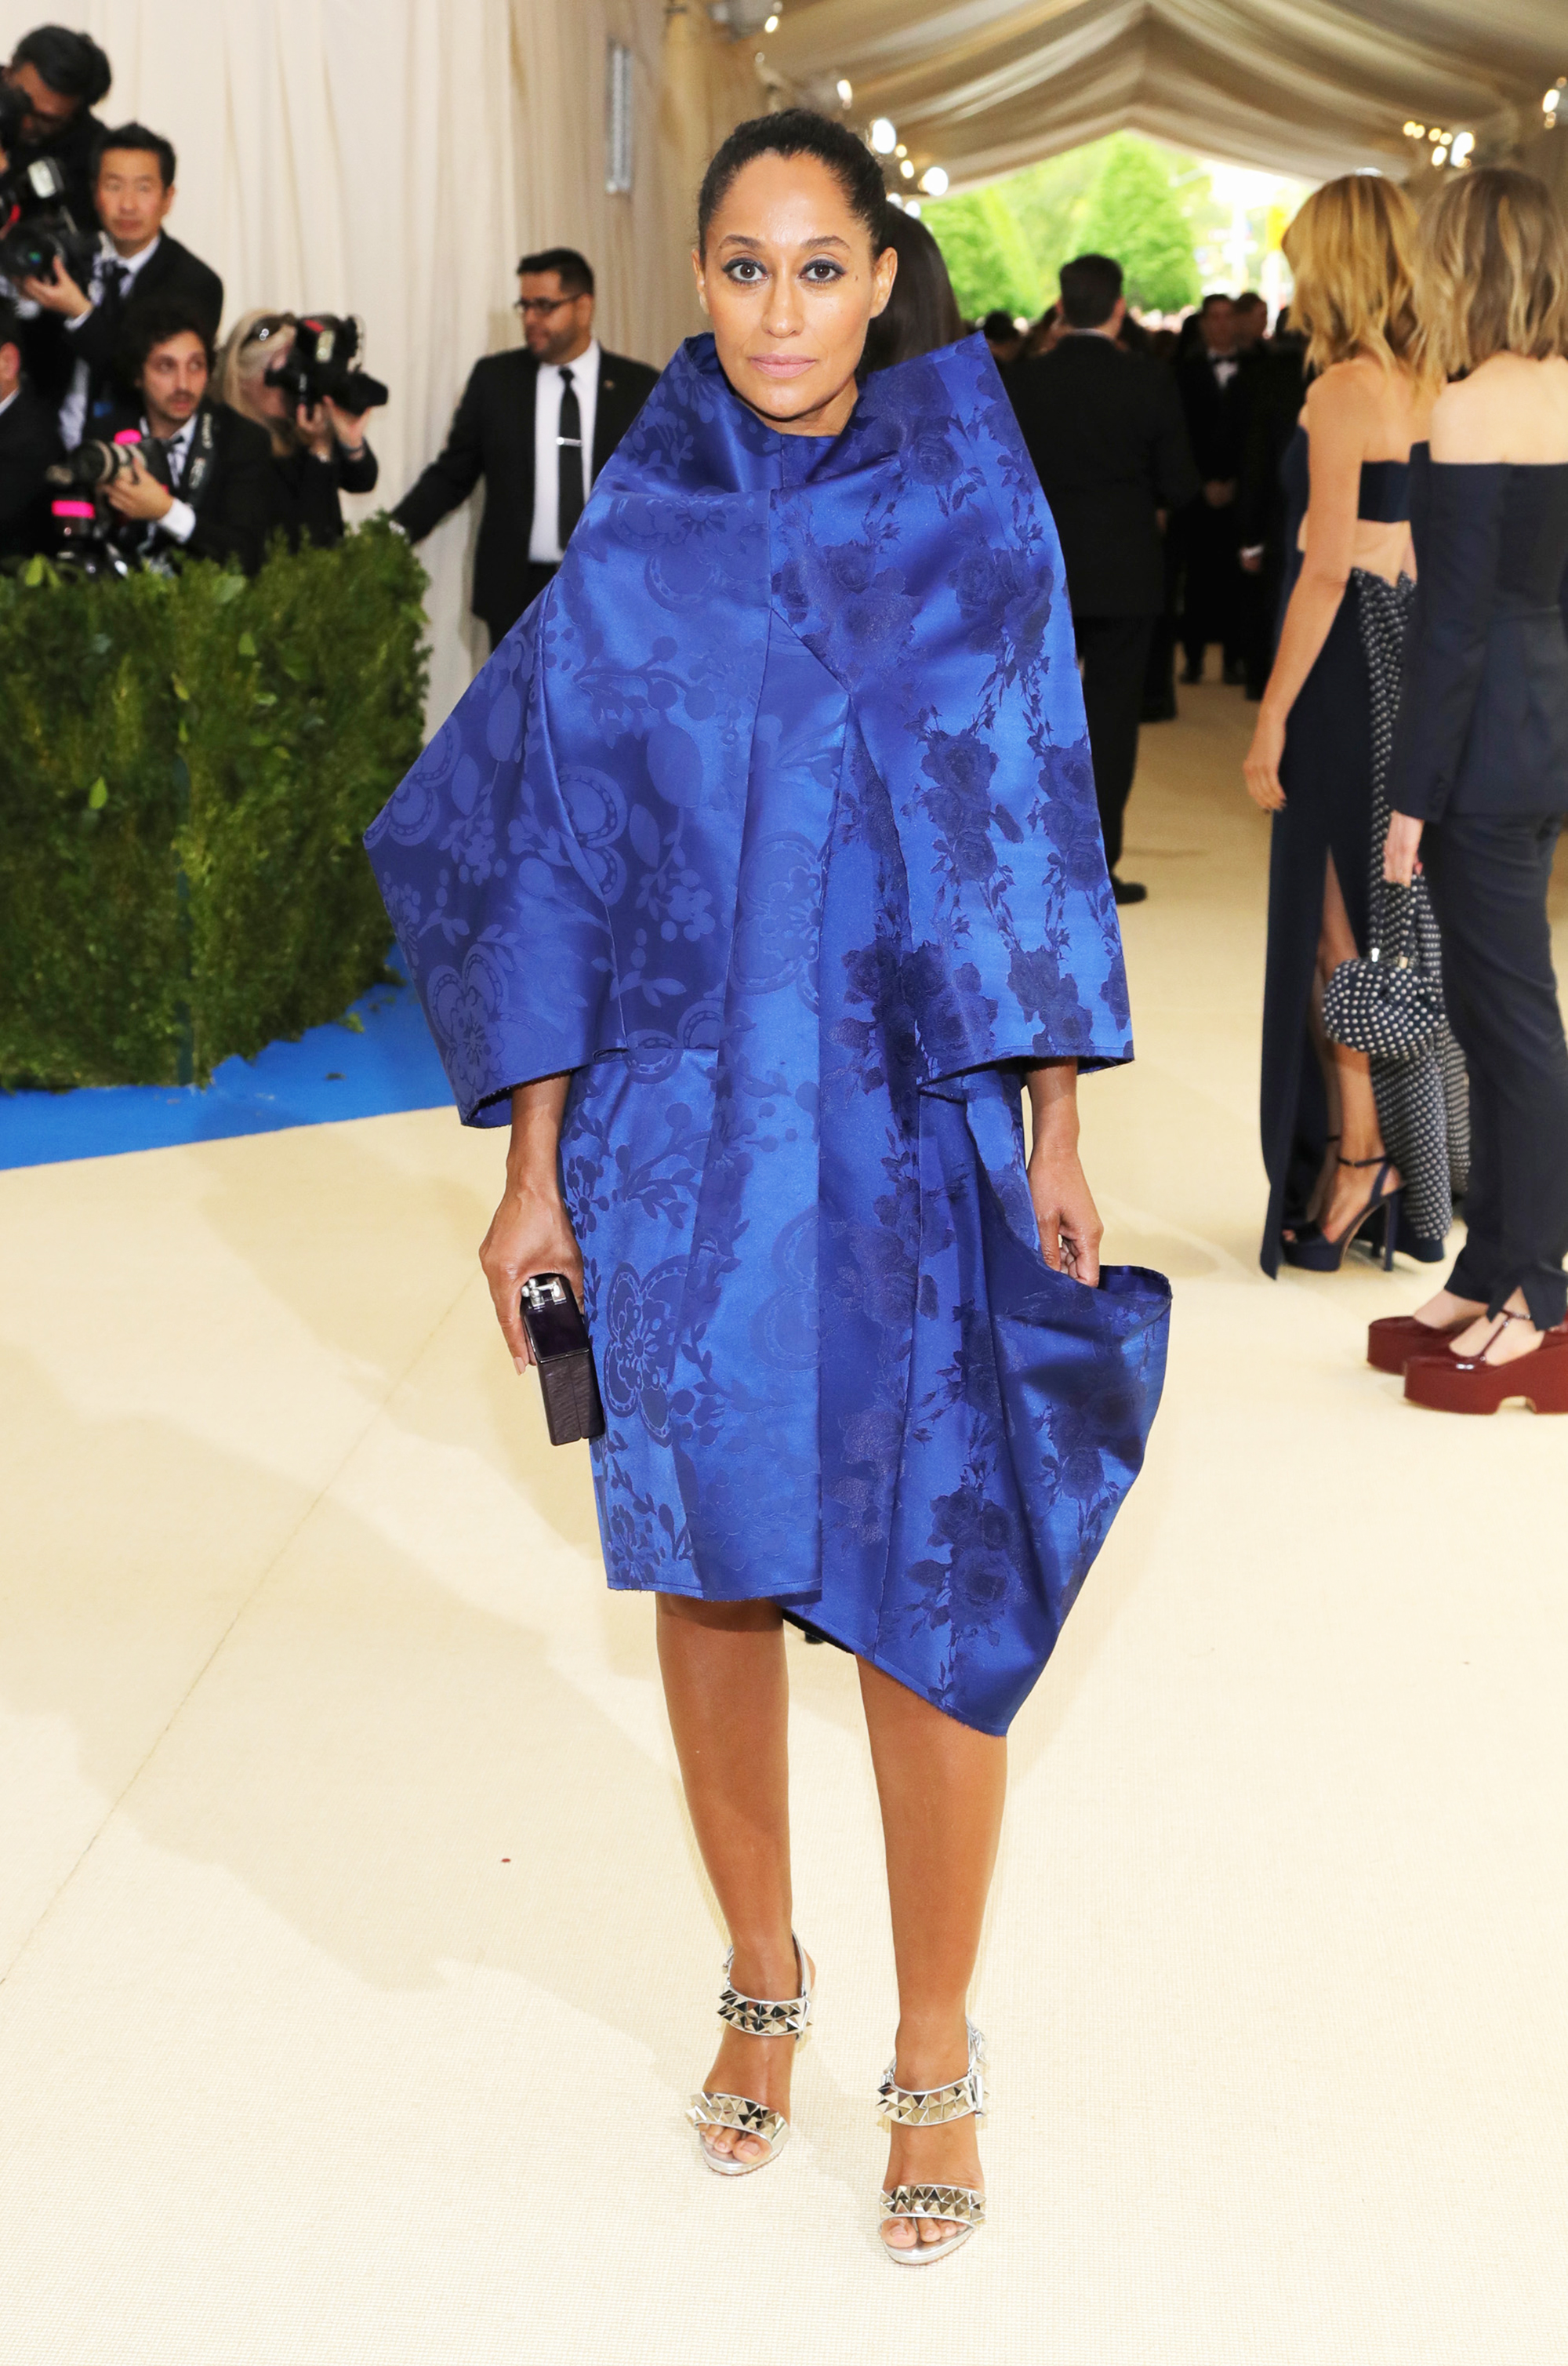 Tracee Ellis Ross attends The Metropolitan Museum of Art's Costume Institute benefit gala celebrating the opening of the Rei Kawakubo/Comme des Garçons: Art of the In-Between exhibition in New York City, on May 1, 2017.